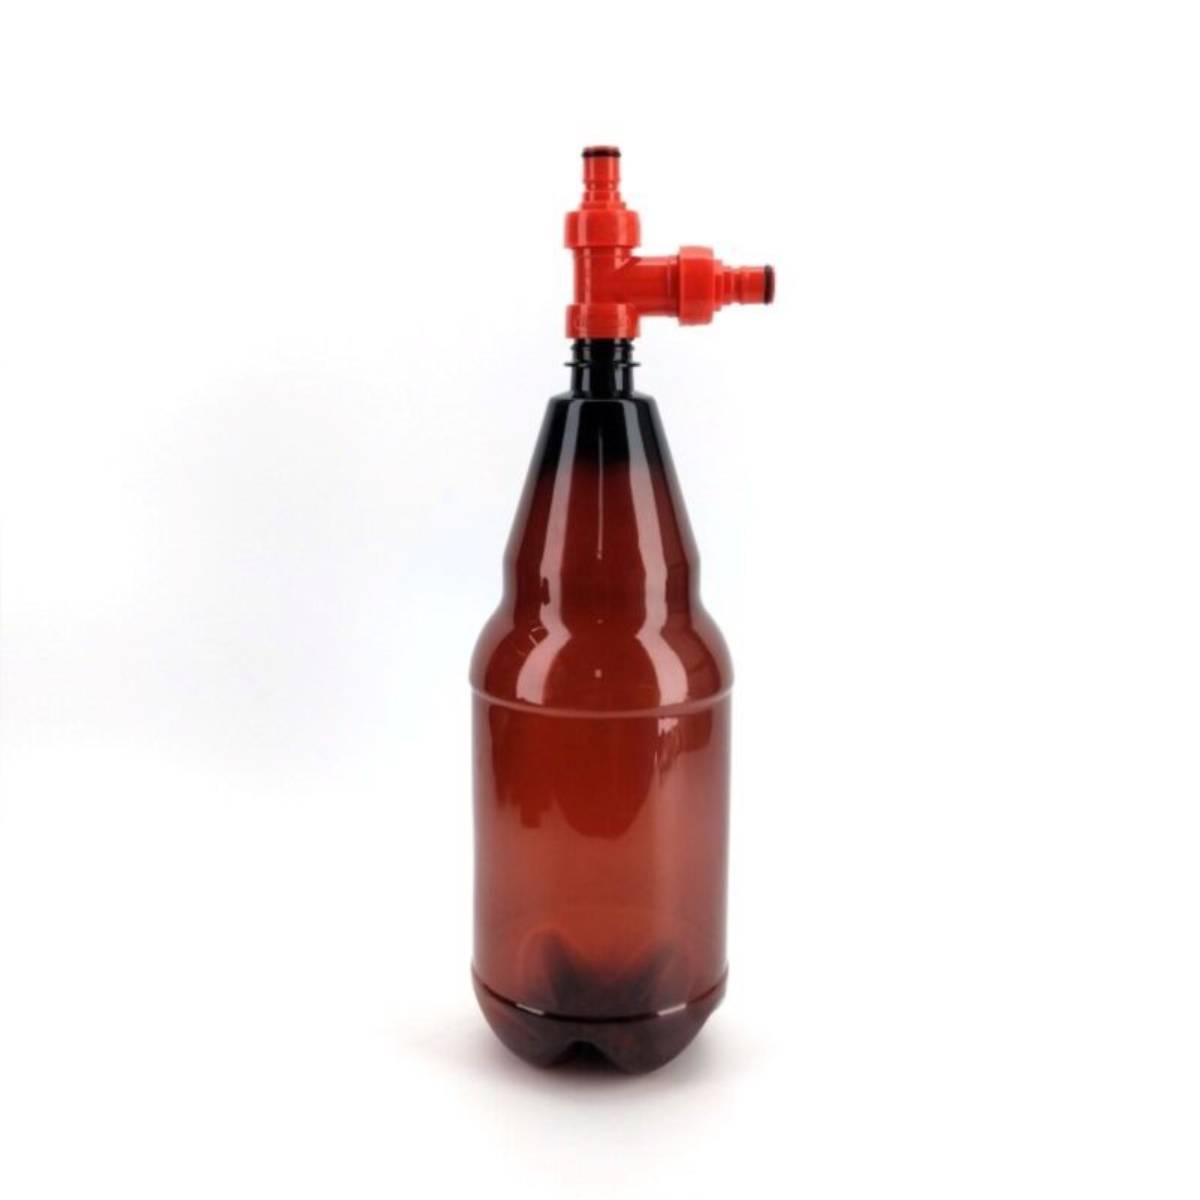 Tee piece connector for PET bottles and carbonation caps